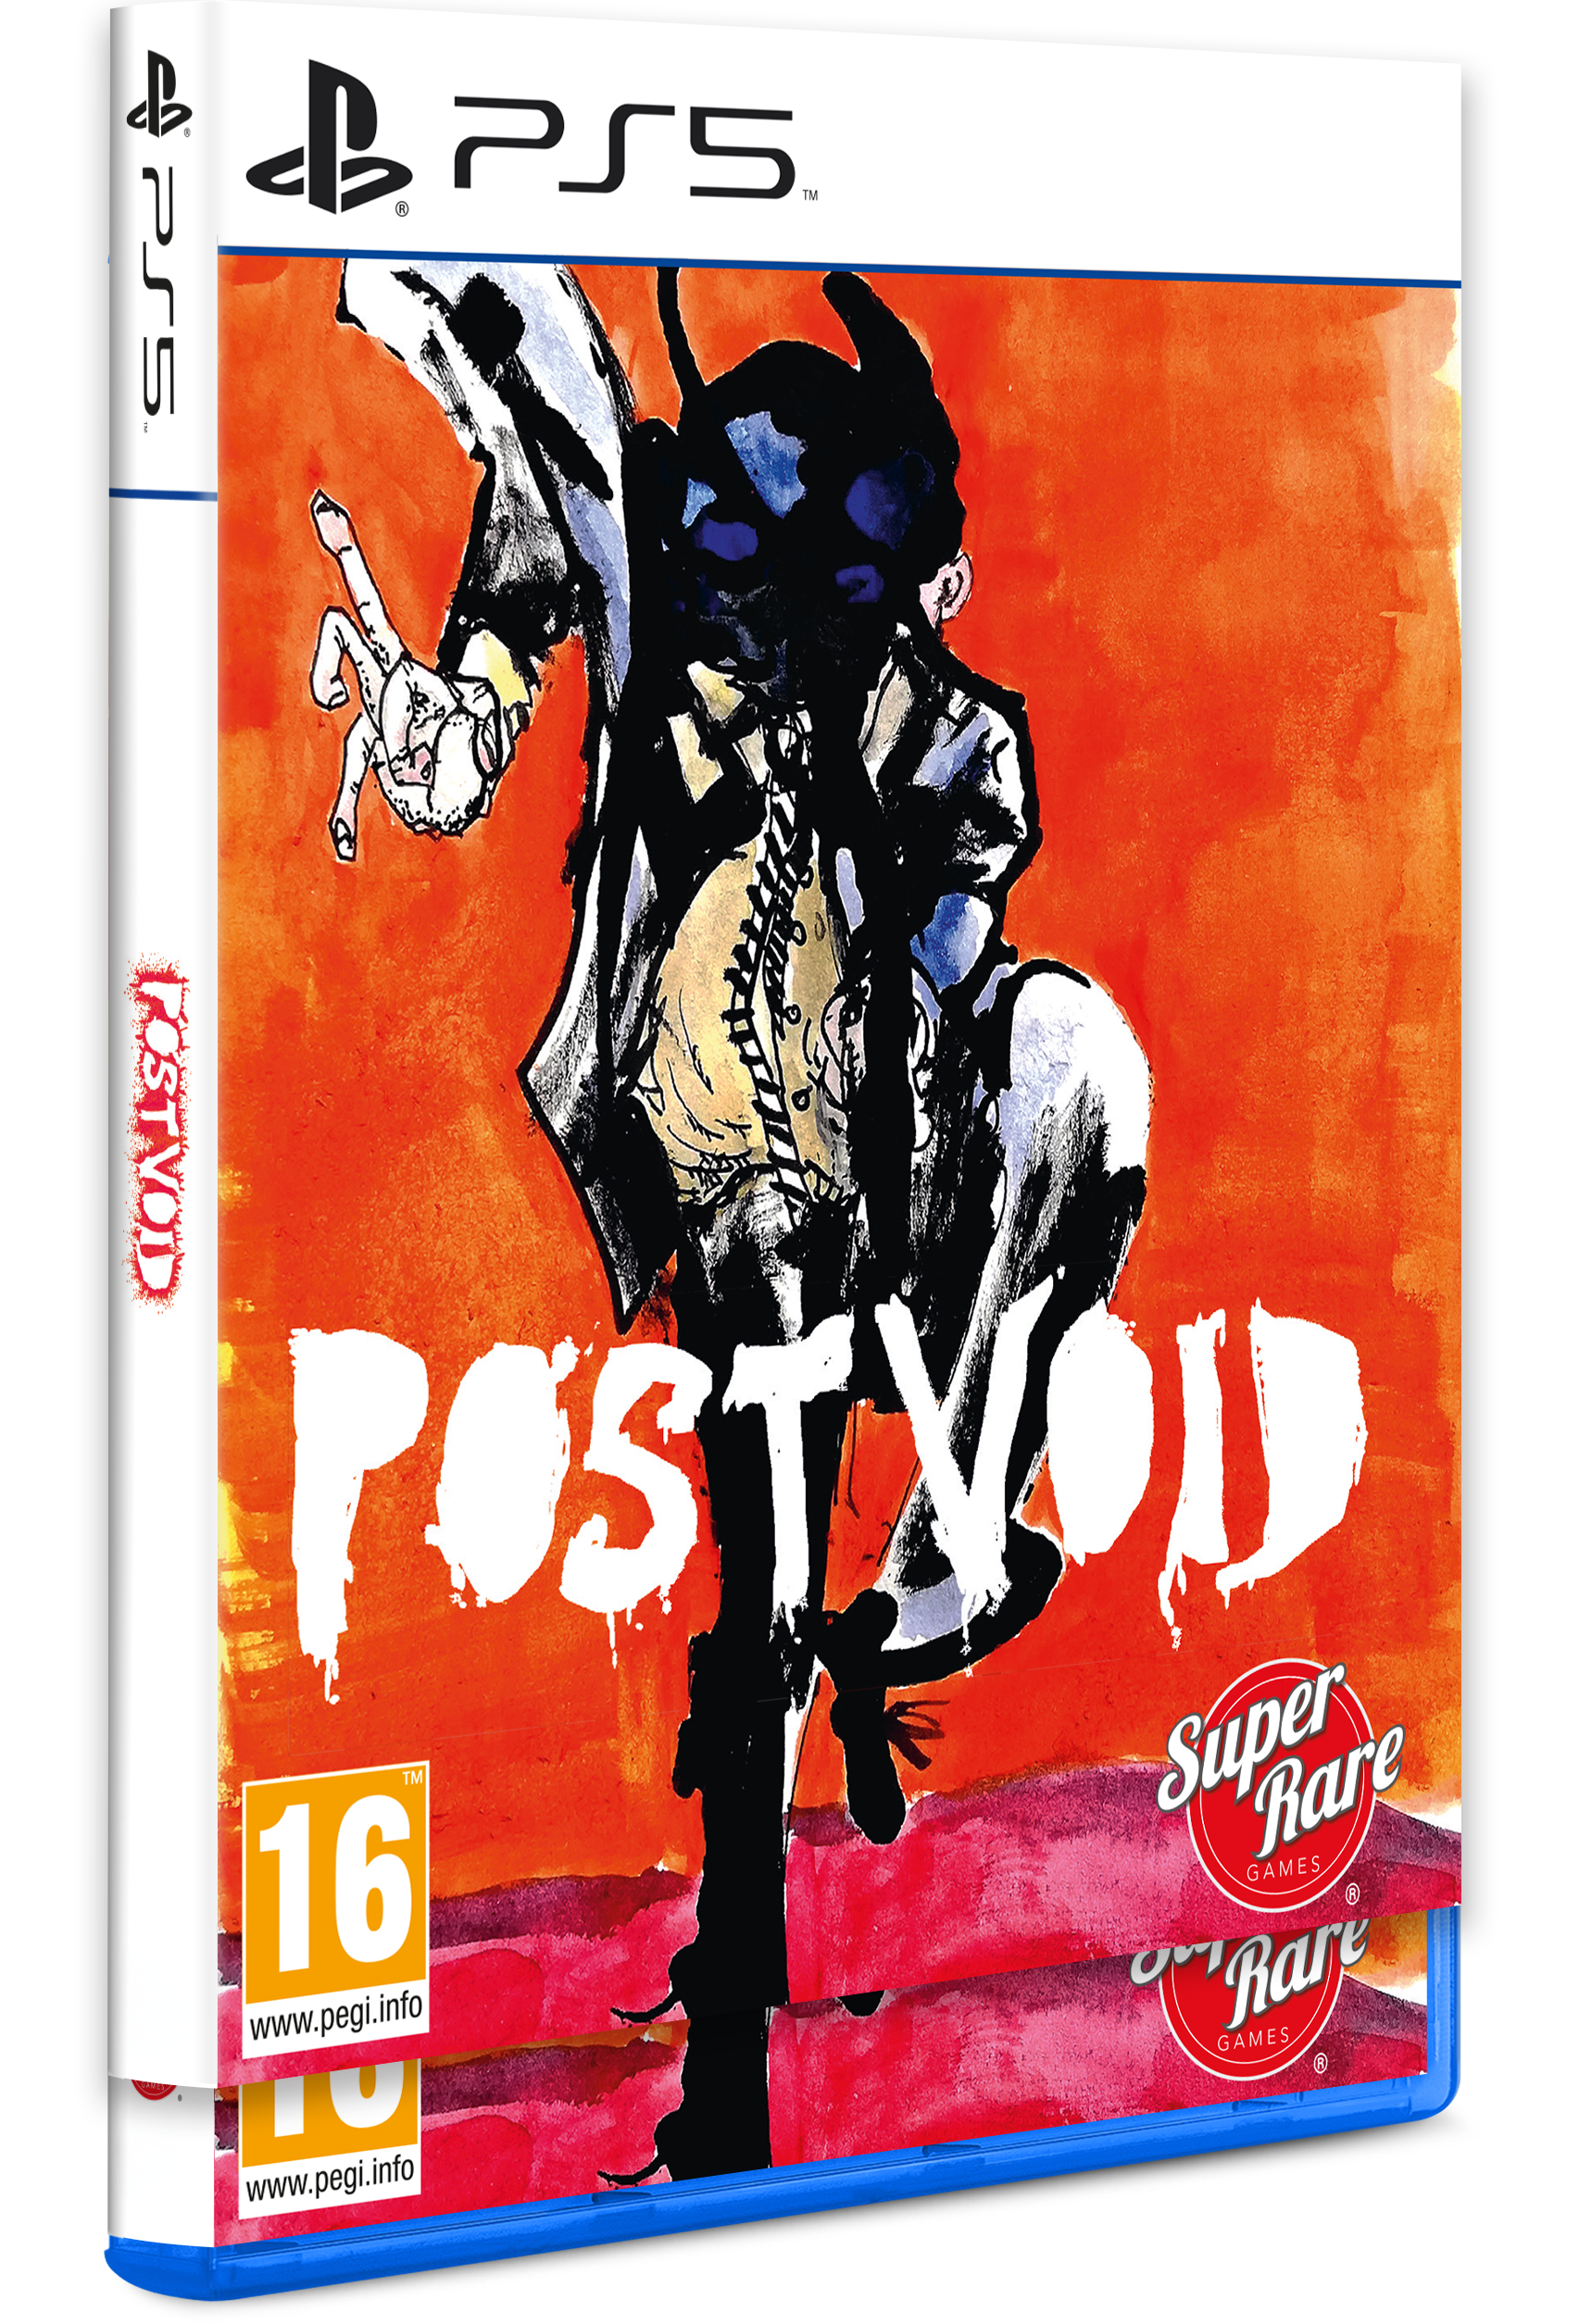 Post Void blasts to PS5 and PS4 this spring – PlayStation.Blog